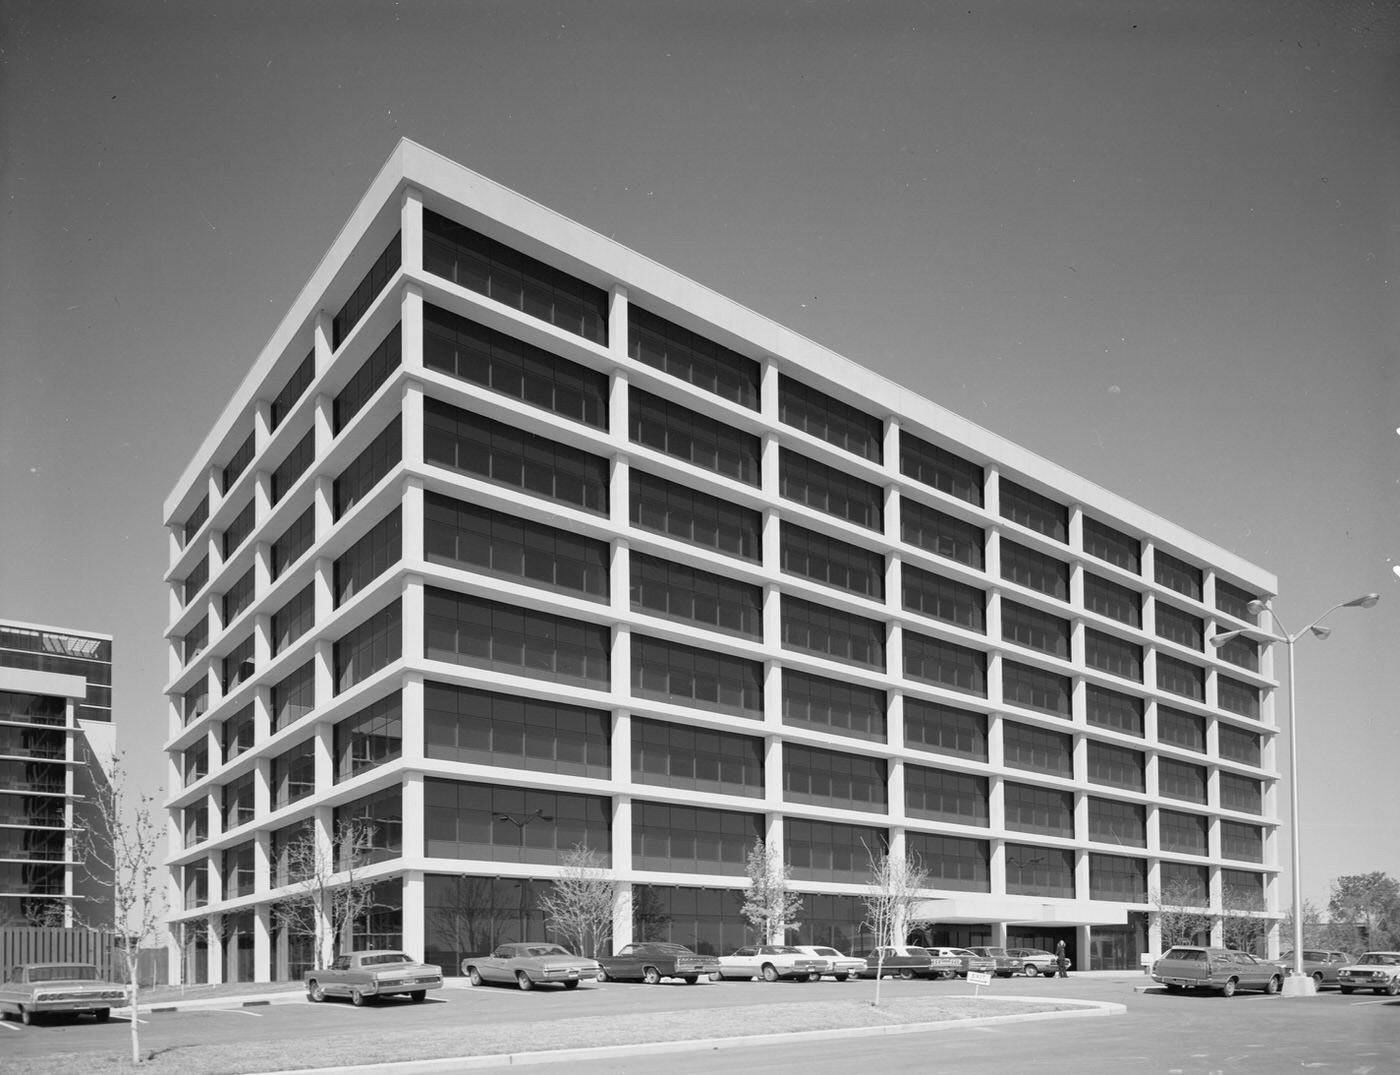 Office building on Central Expressway, Dallas, Texas, 1963